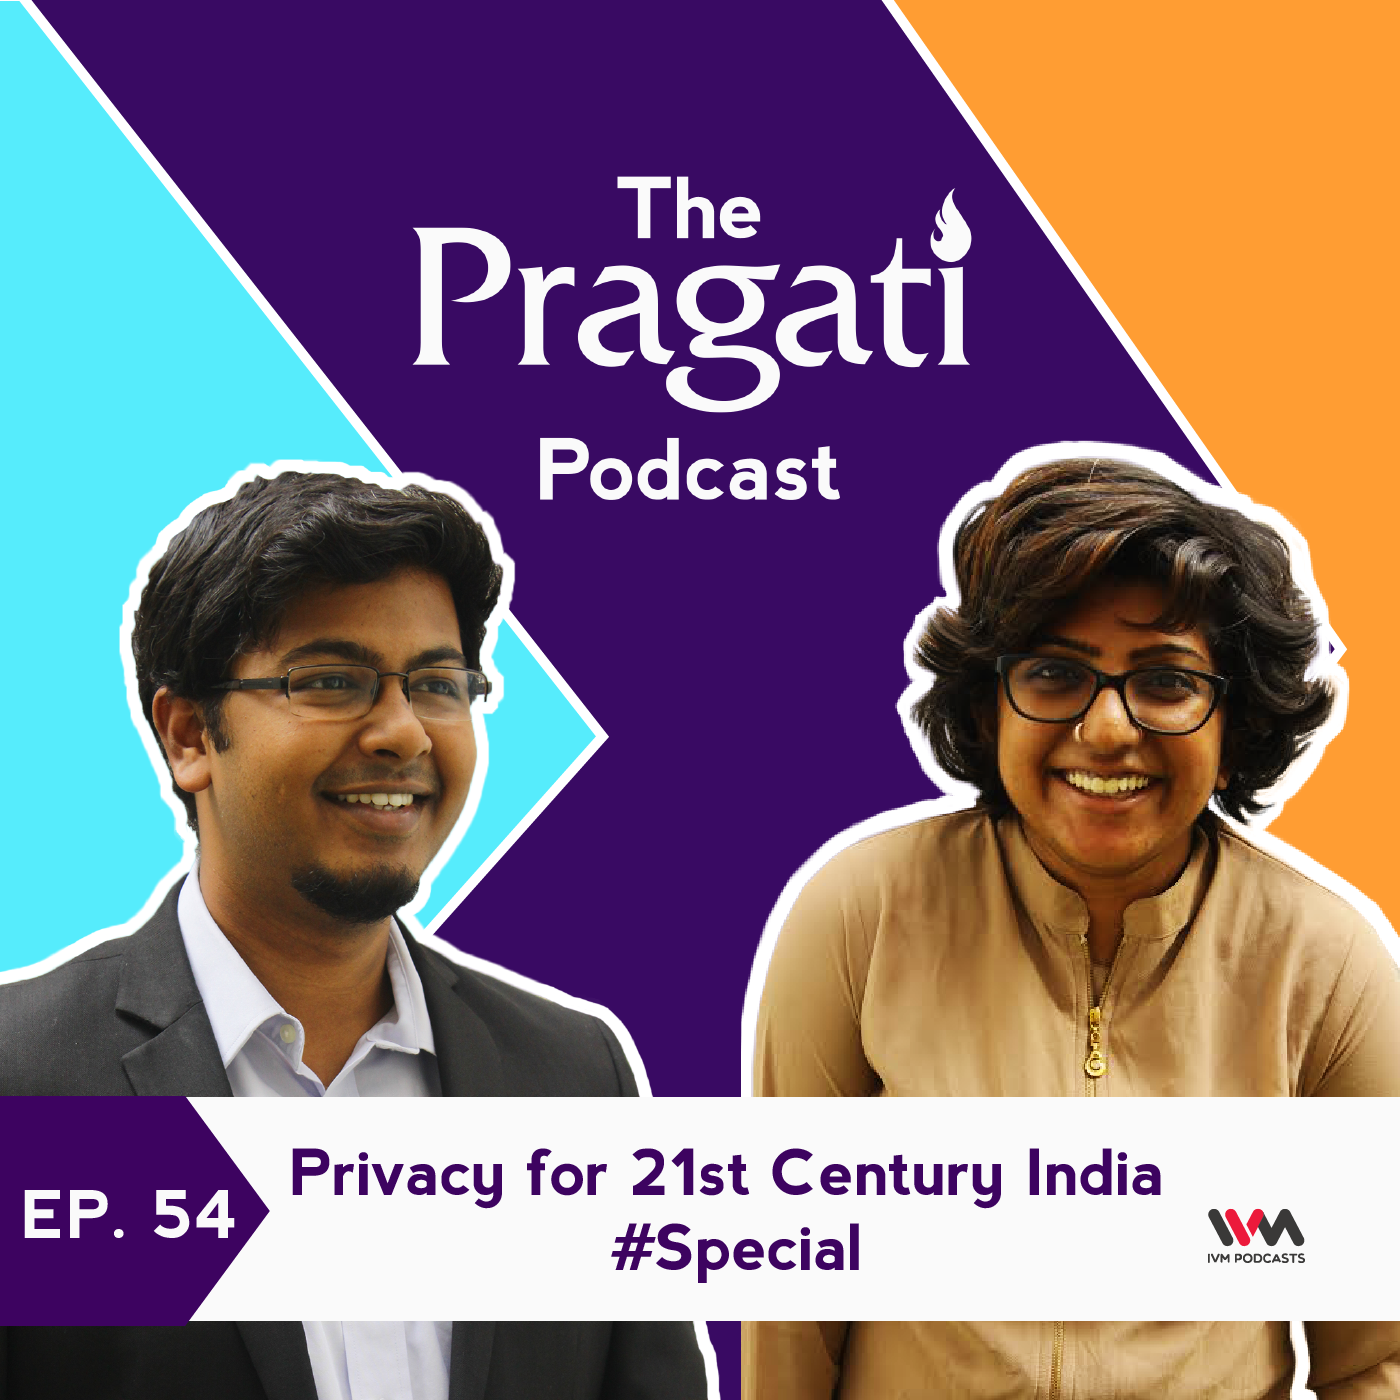 Ep. 54: Privacy for 21st Century India